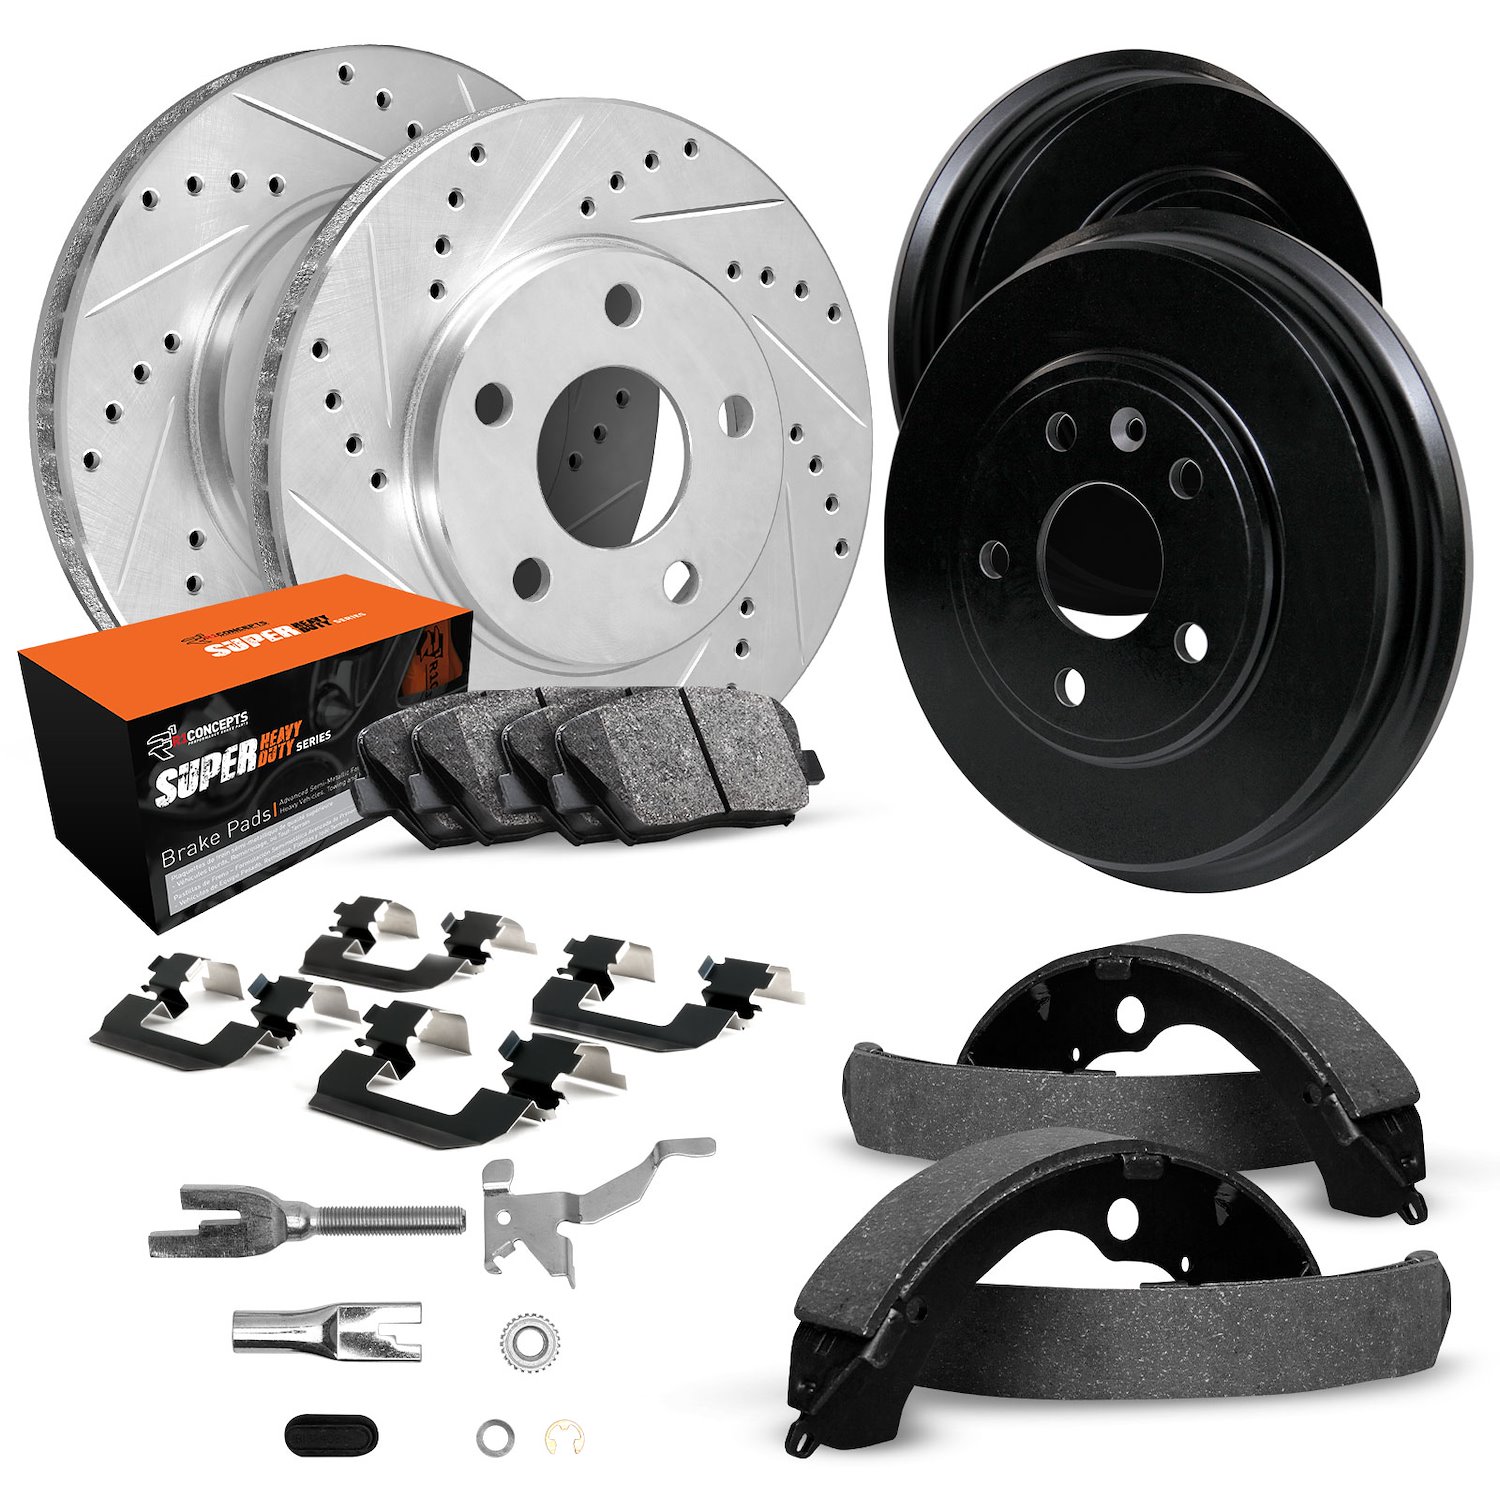 E-Line Drilled/Slotted Silver Rotor & Drum Set w/Super-Duty Pads, Shoes/Hardware/Adjusters, 1986-1991 Ford/Lincoln/Mercury/Mazda